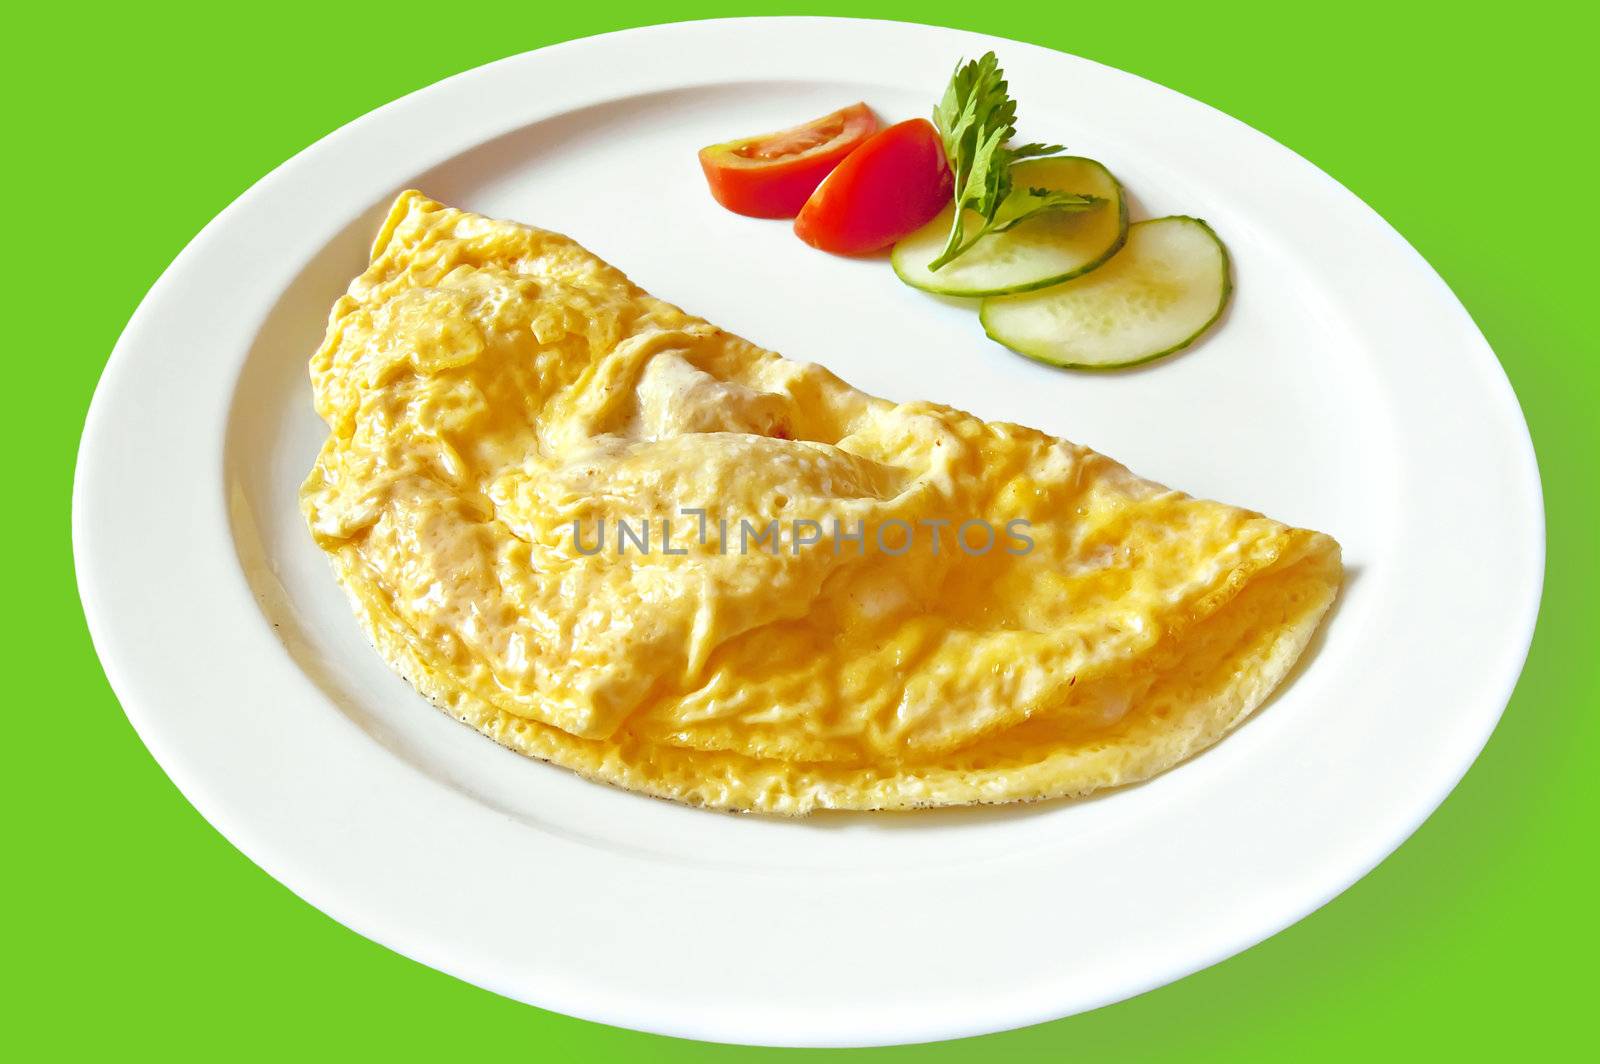 Yellow omelet, two slices of red tomatoes and cucumber, a sprig of parsley on the dish isolated on green background